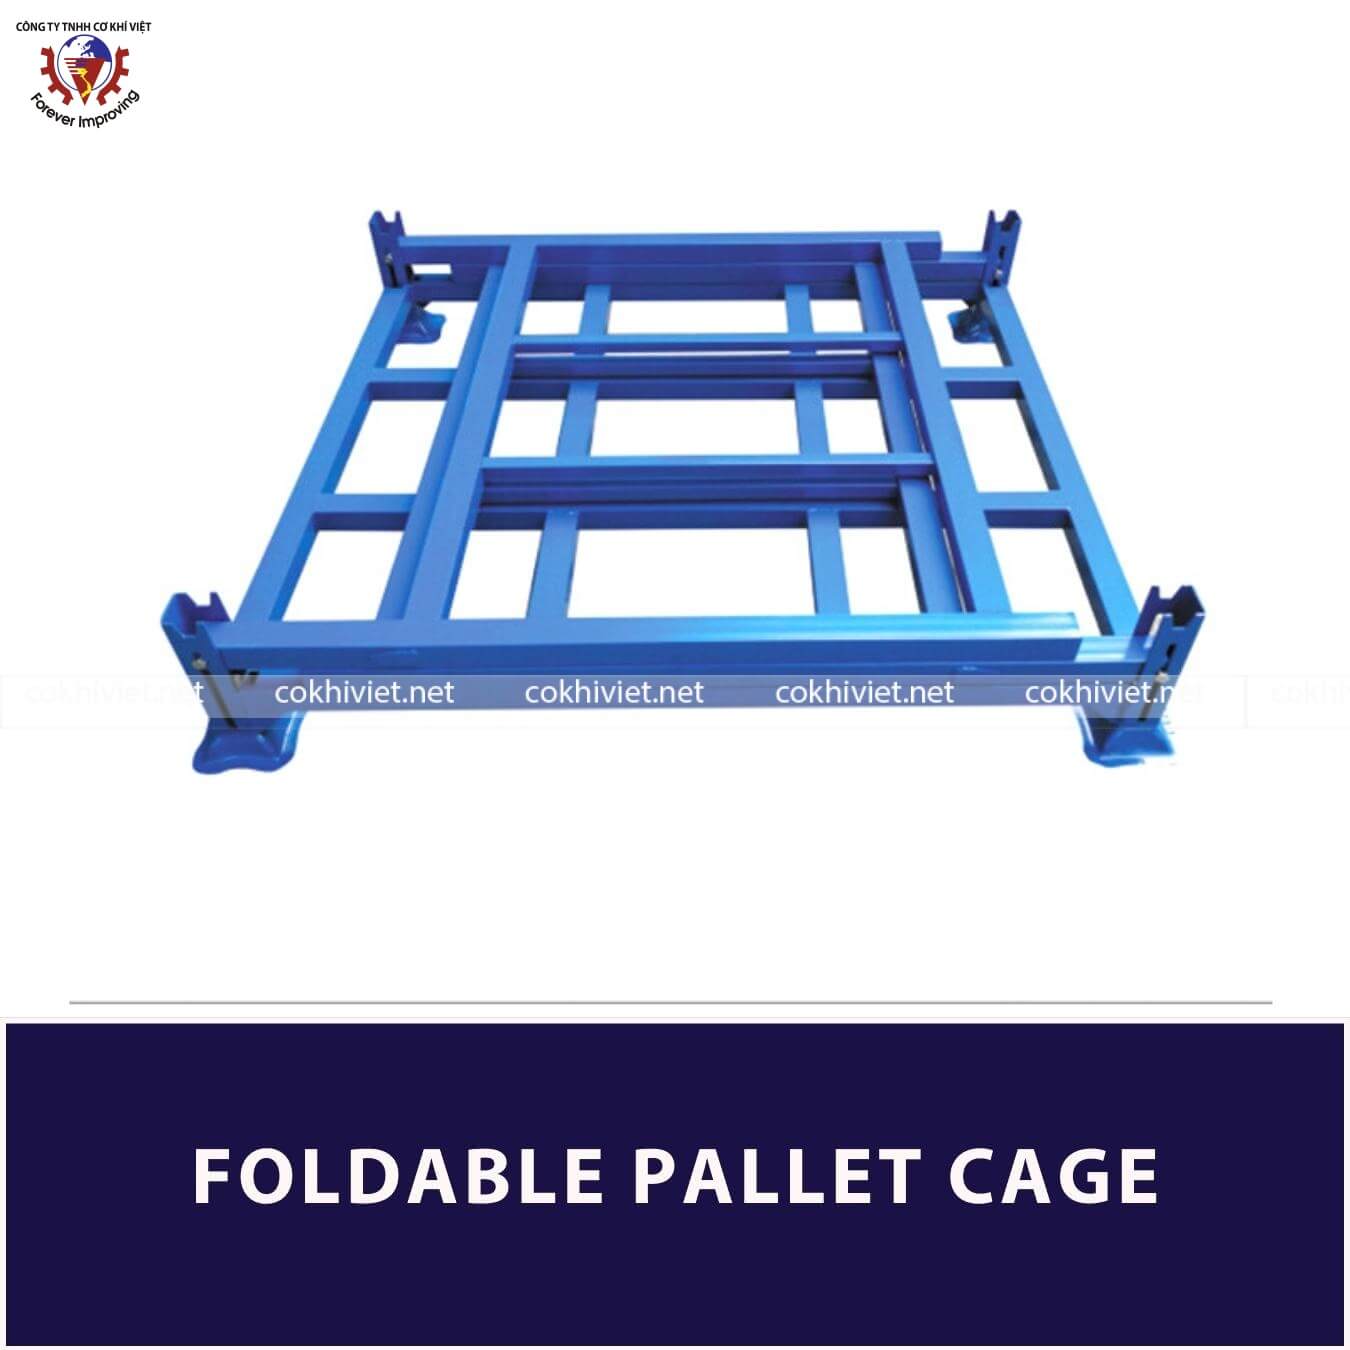 foldable pallet cage